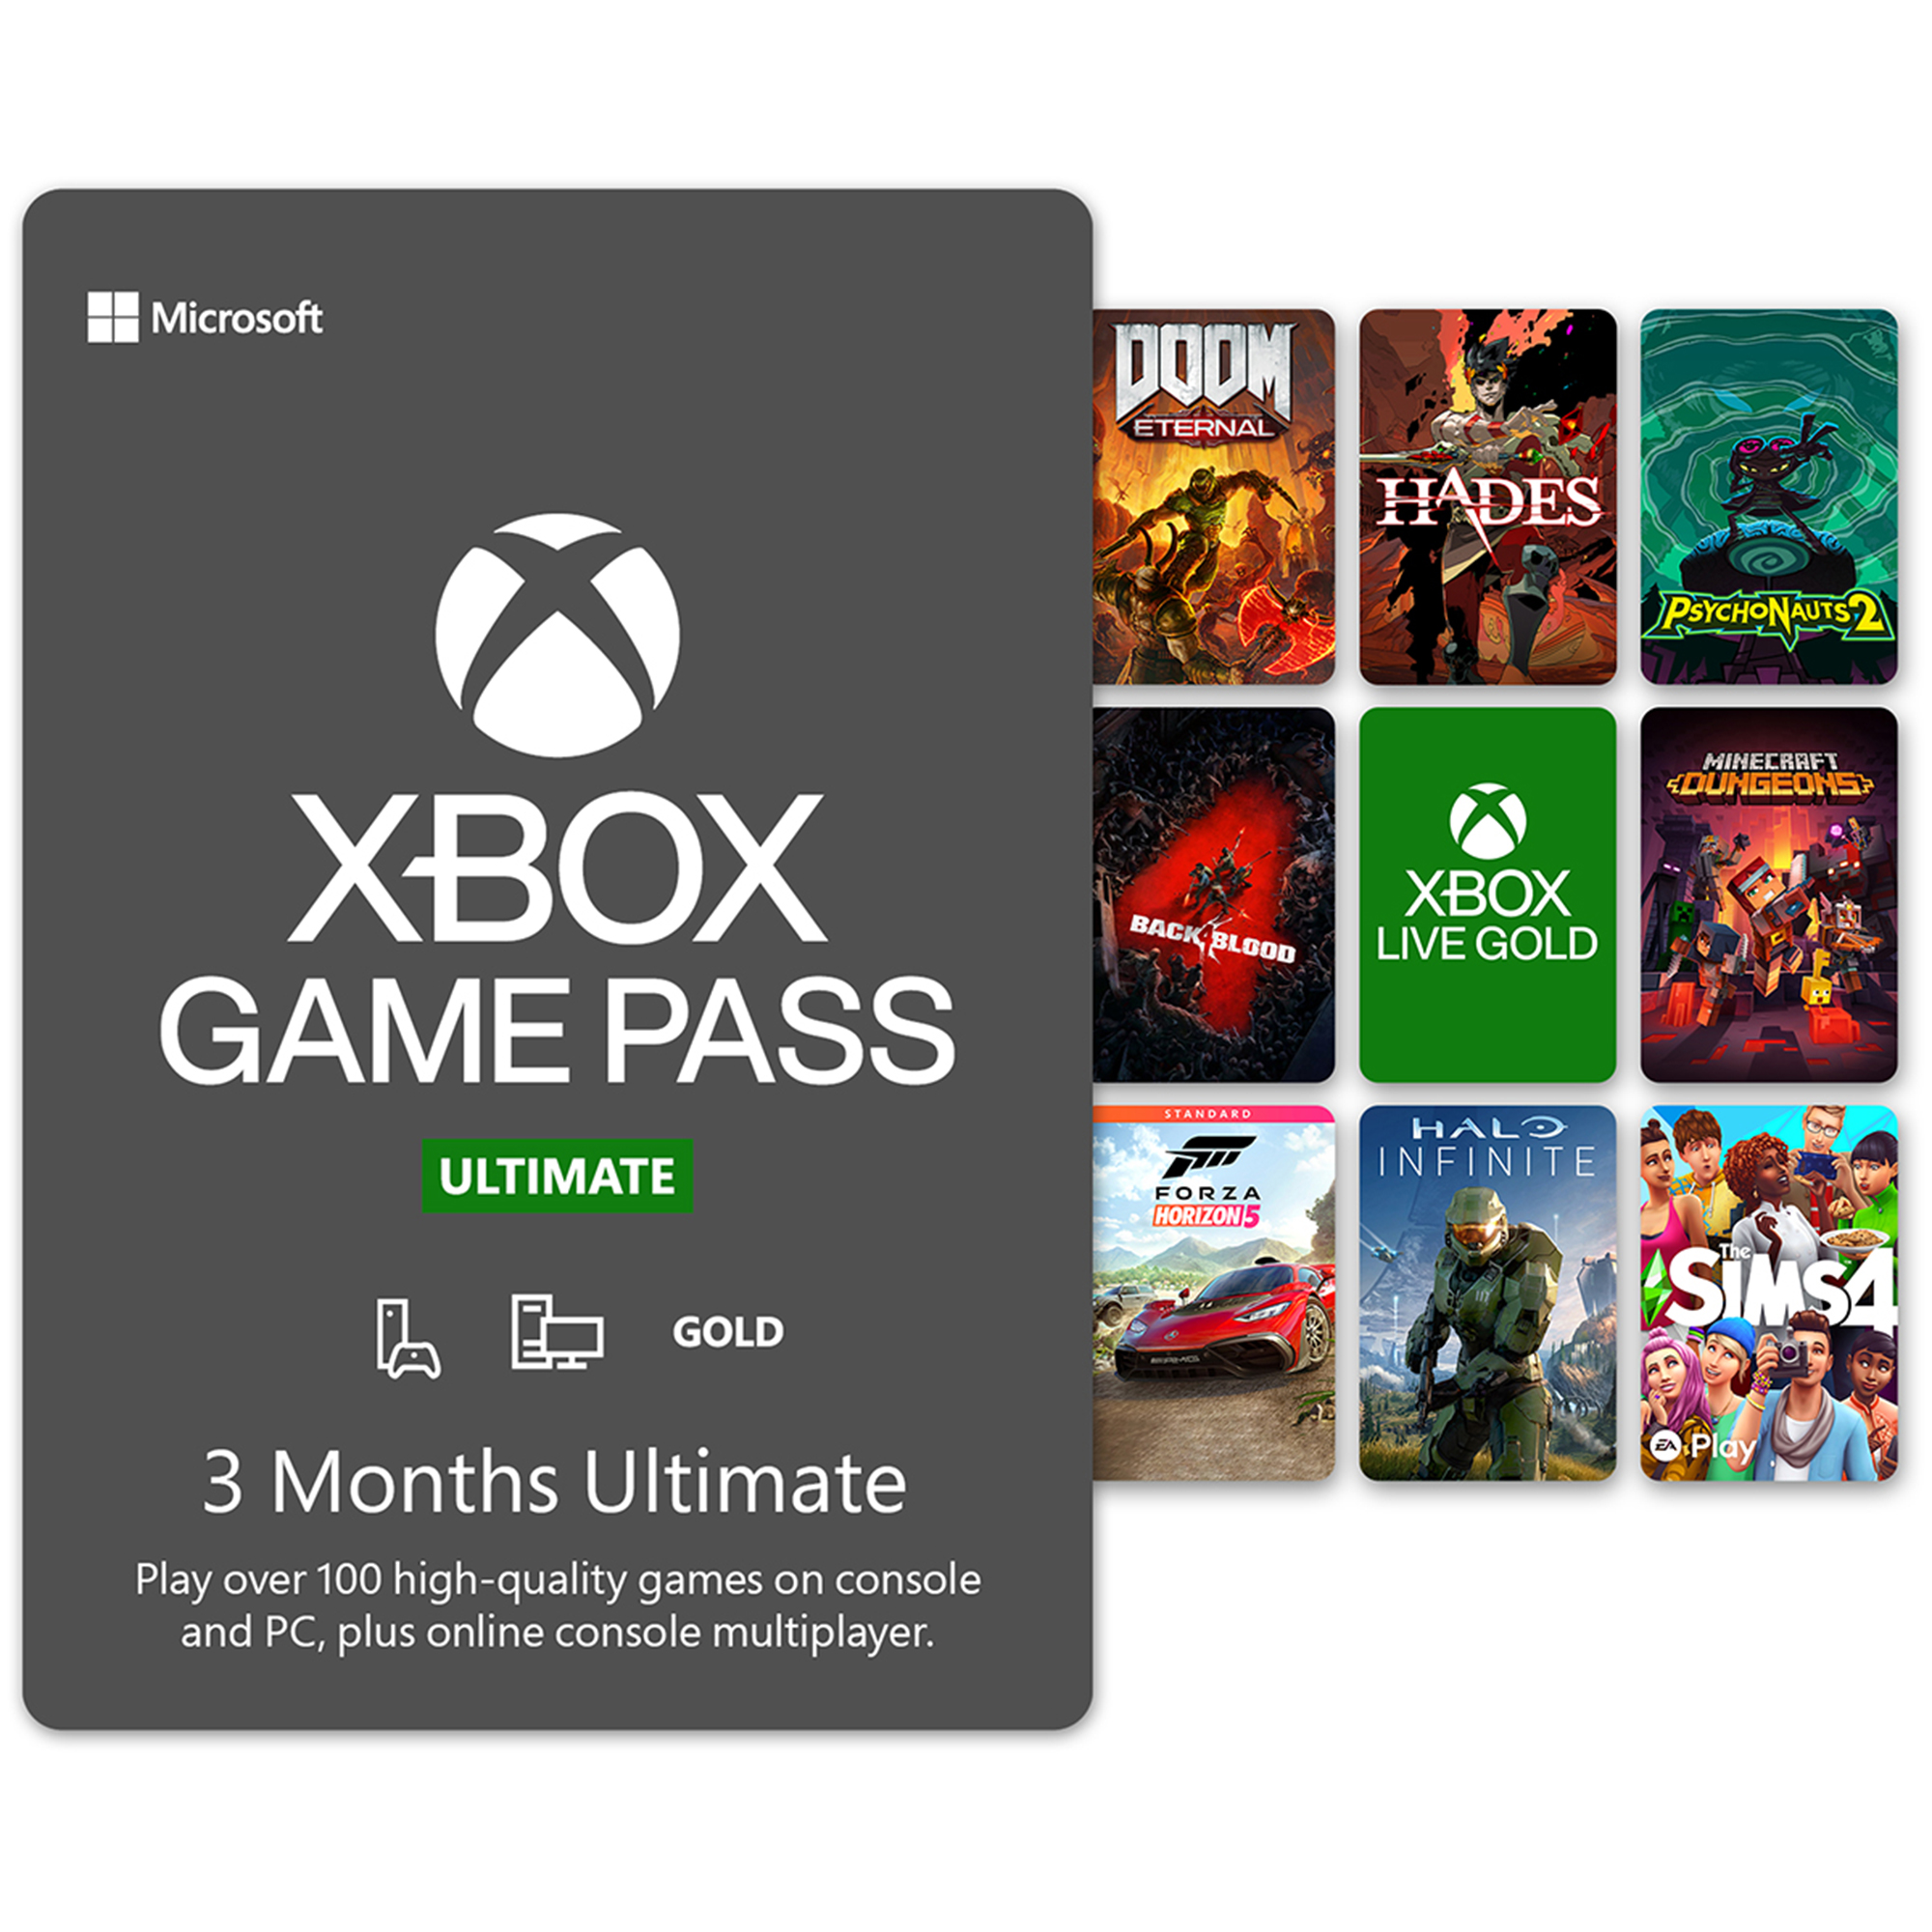 Microsoft - Xbox Game Pass Ultimate 3 Month Membership was $44.99 now $24.99 (44.0% off)